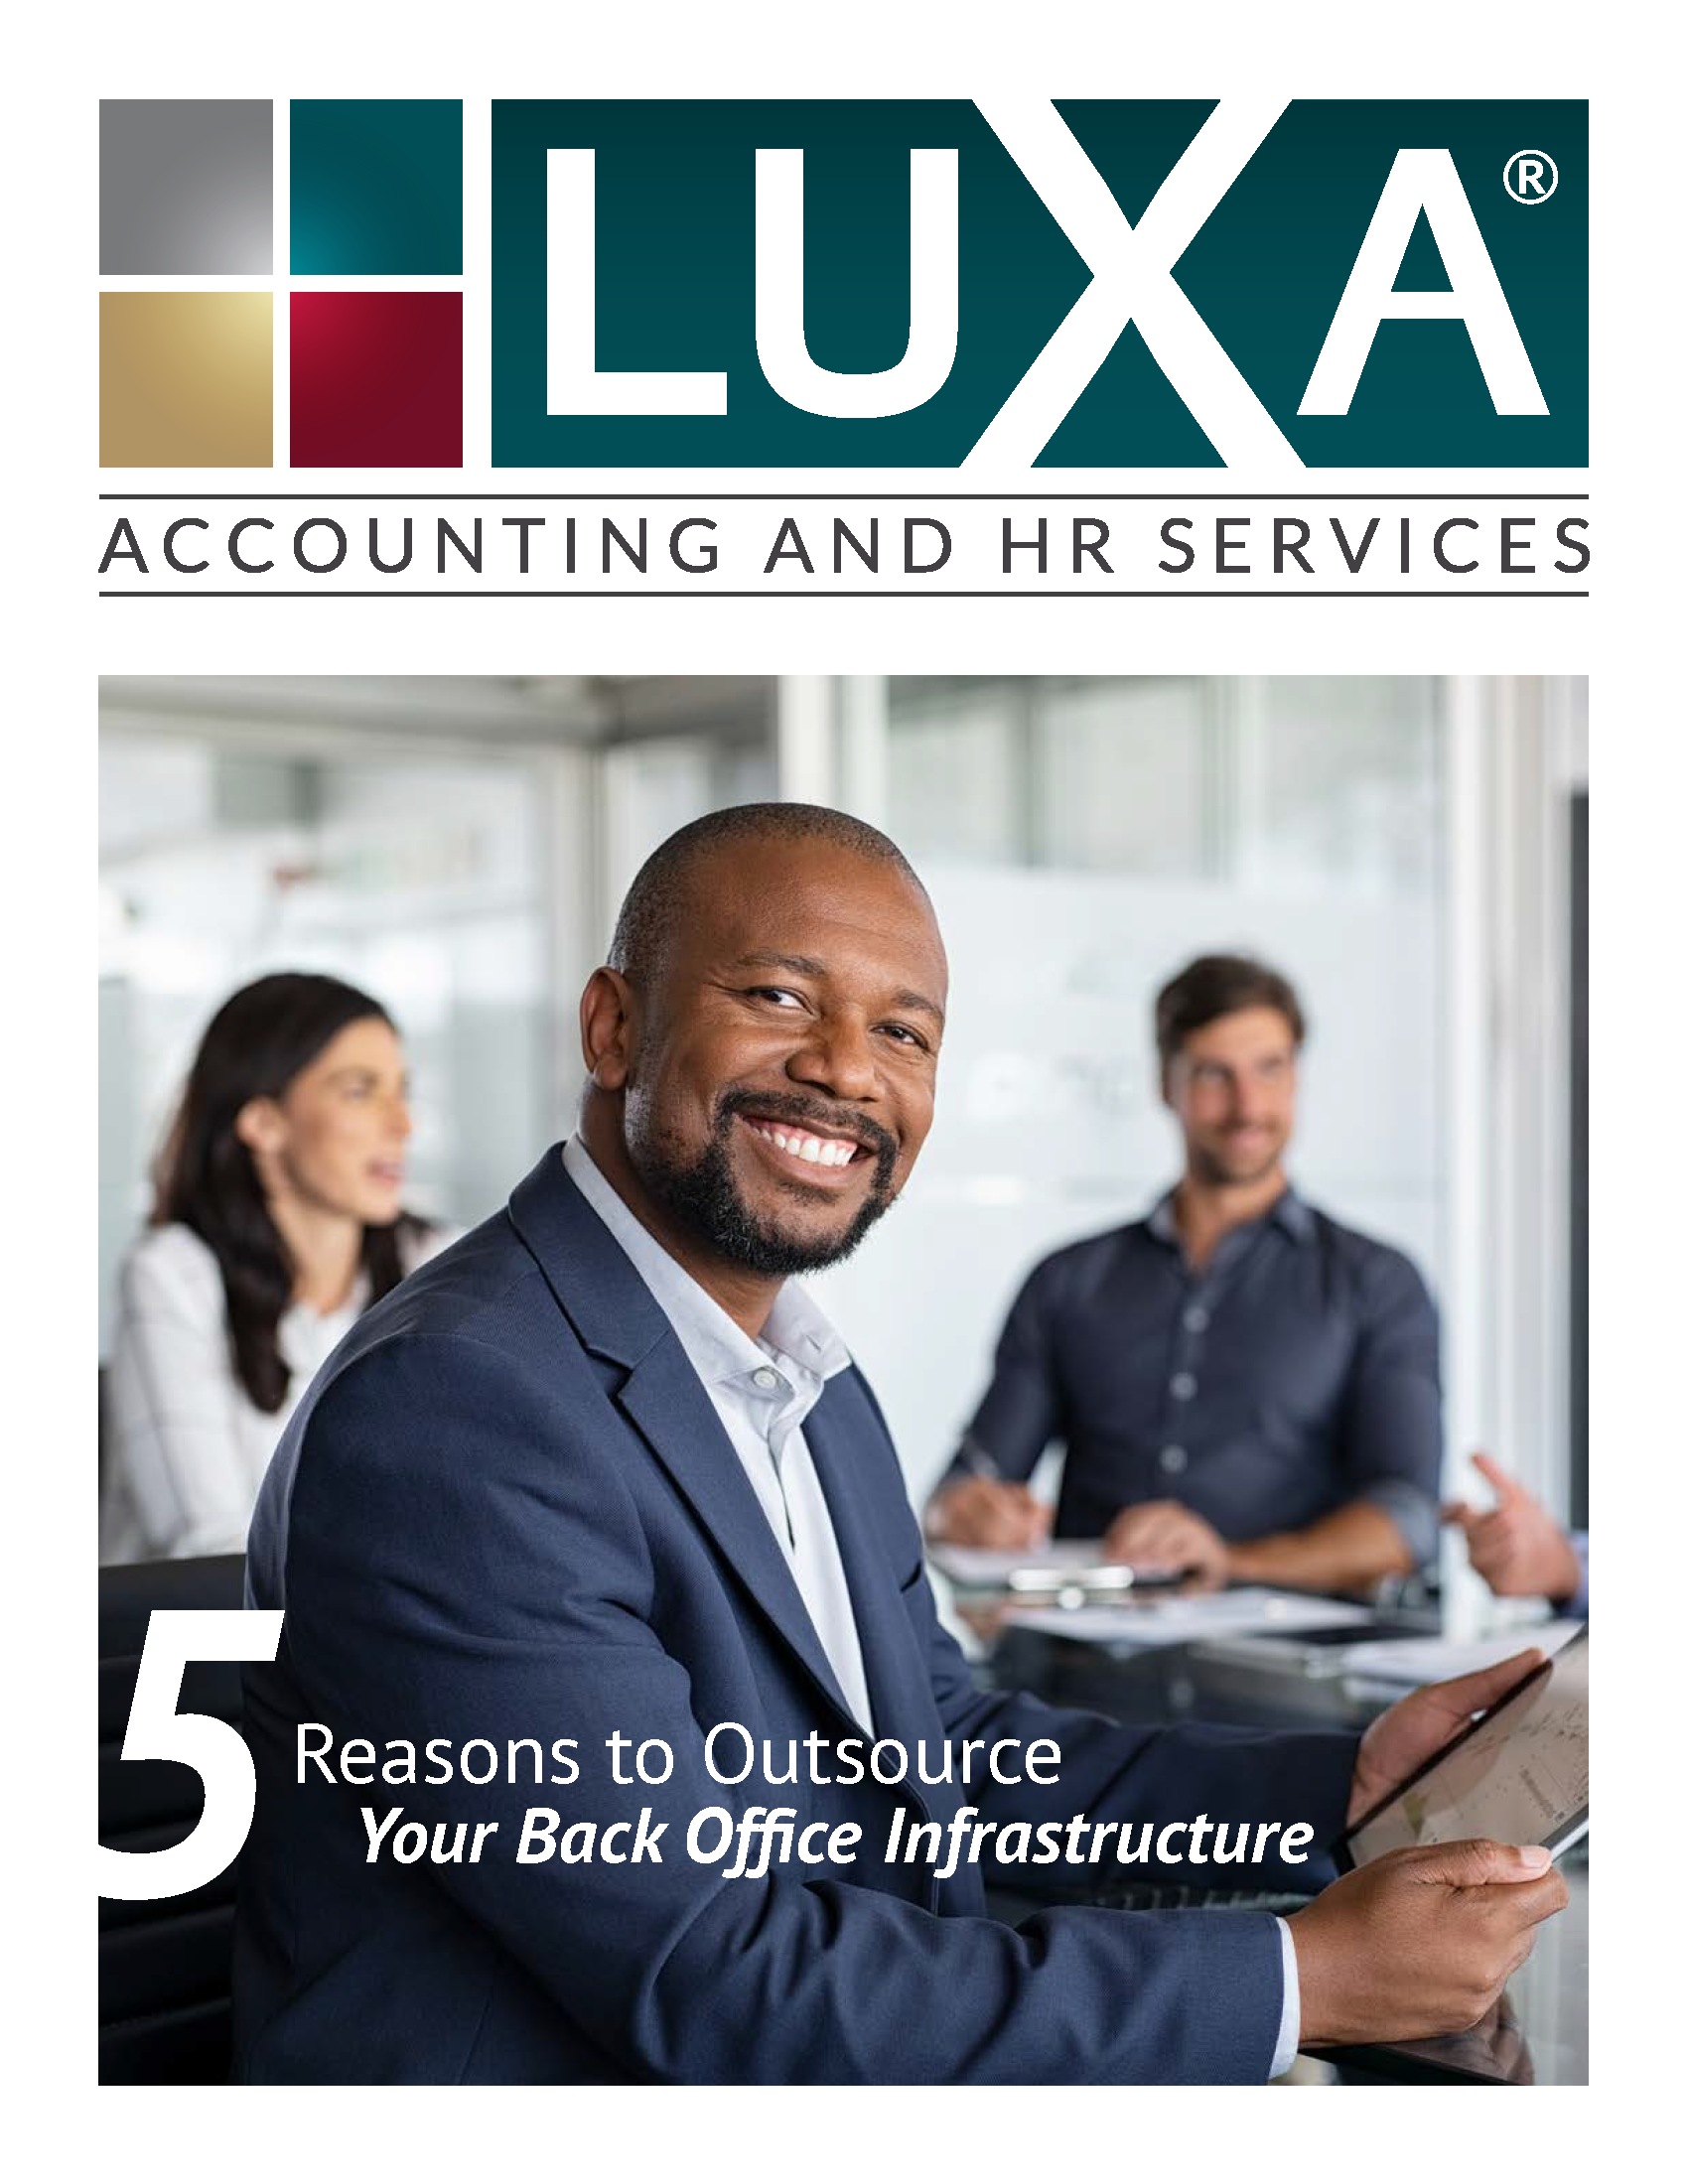 LUXA - 5 Reasons to Outsource Your Back Office Infrastructure